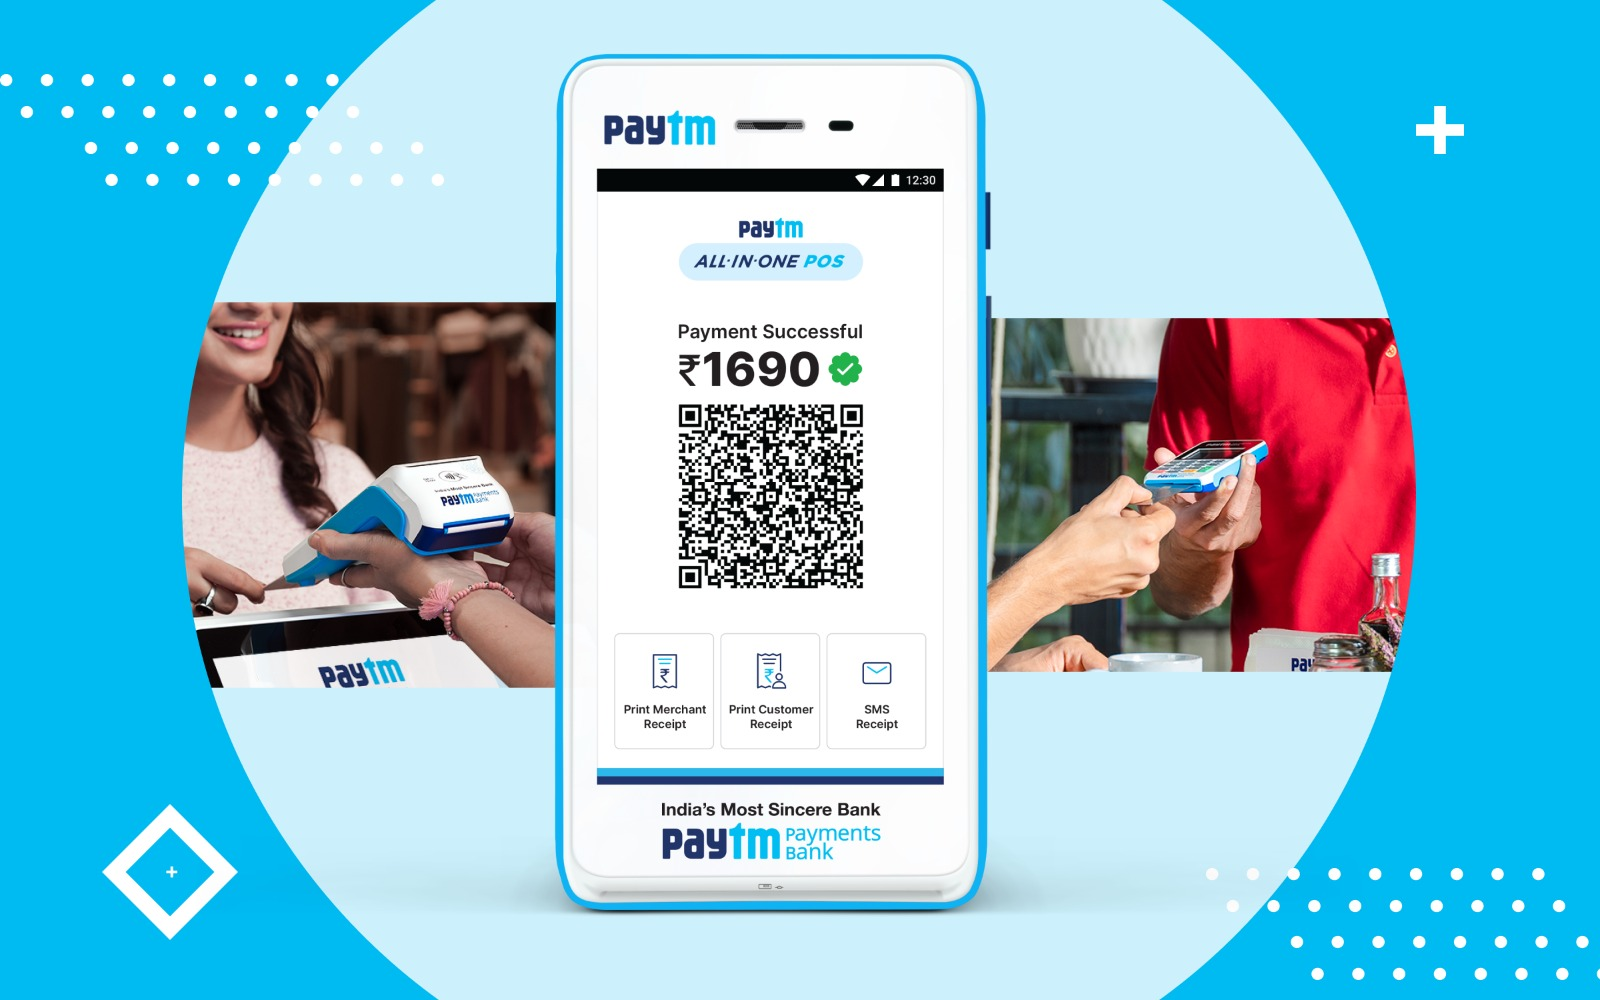 Paytm fires over 1,000 employees in effort to reduce costs